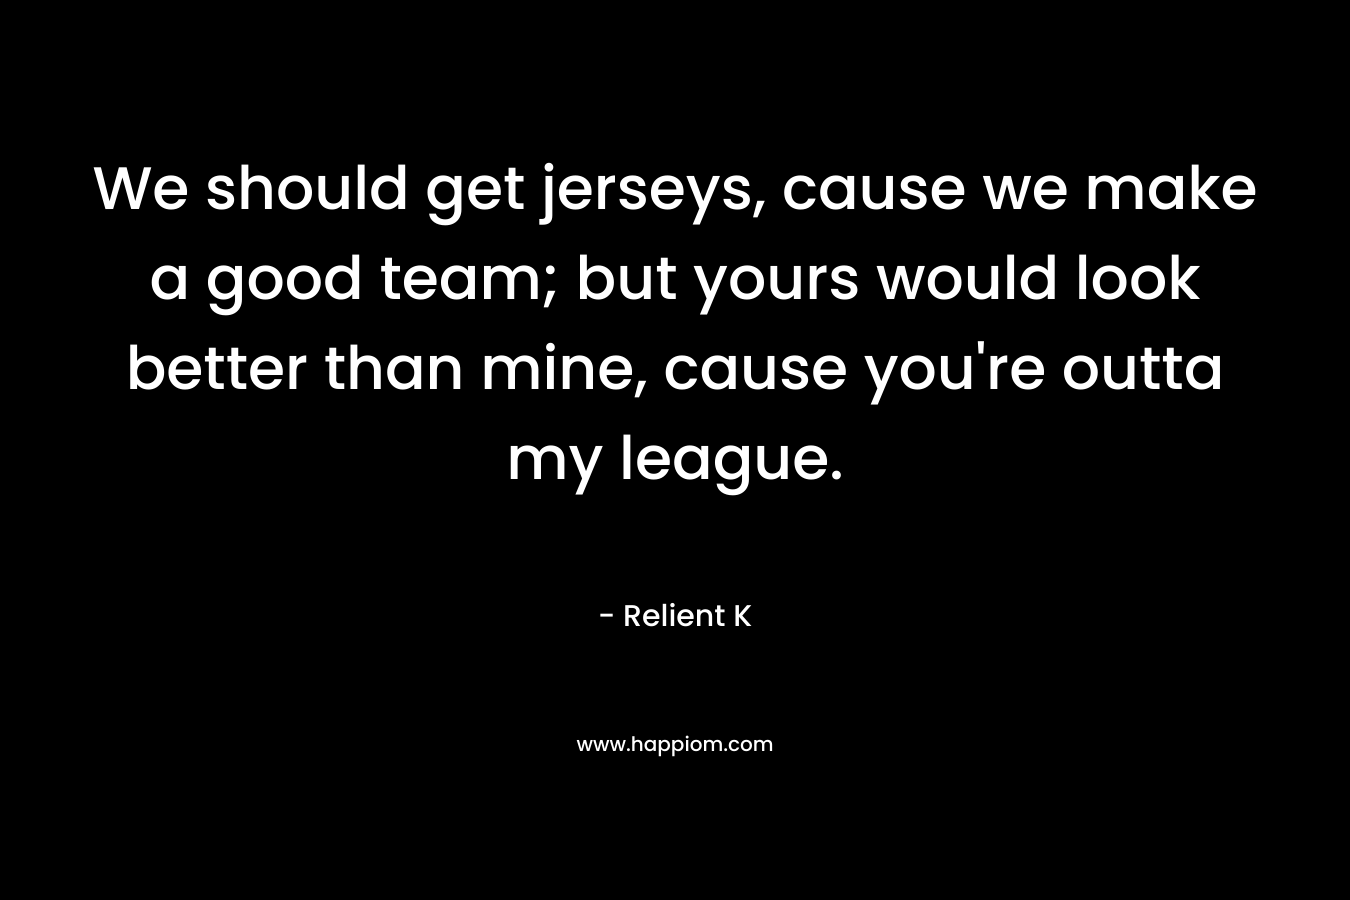 We should get jerseys, cause we make a good team; but yours would look better than mine, cause you’re outta my league. – Relient K